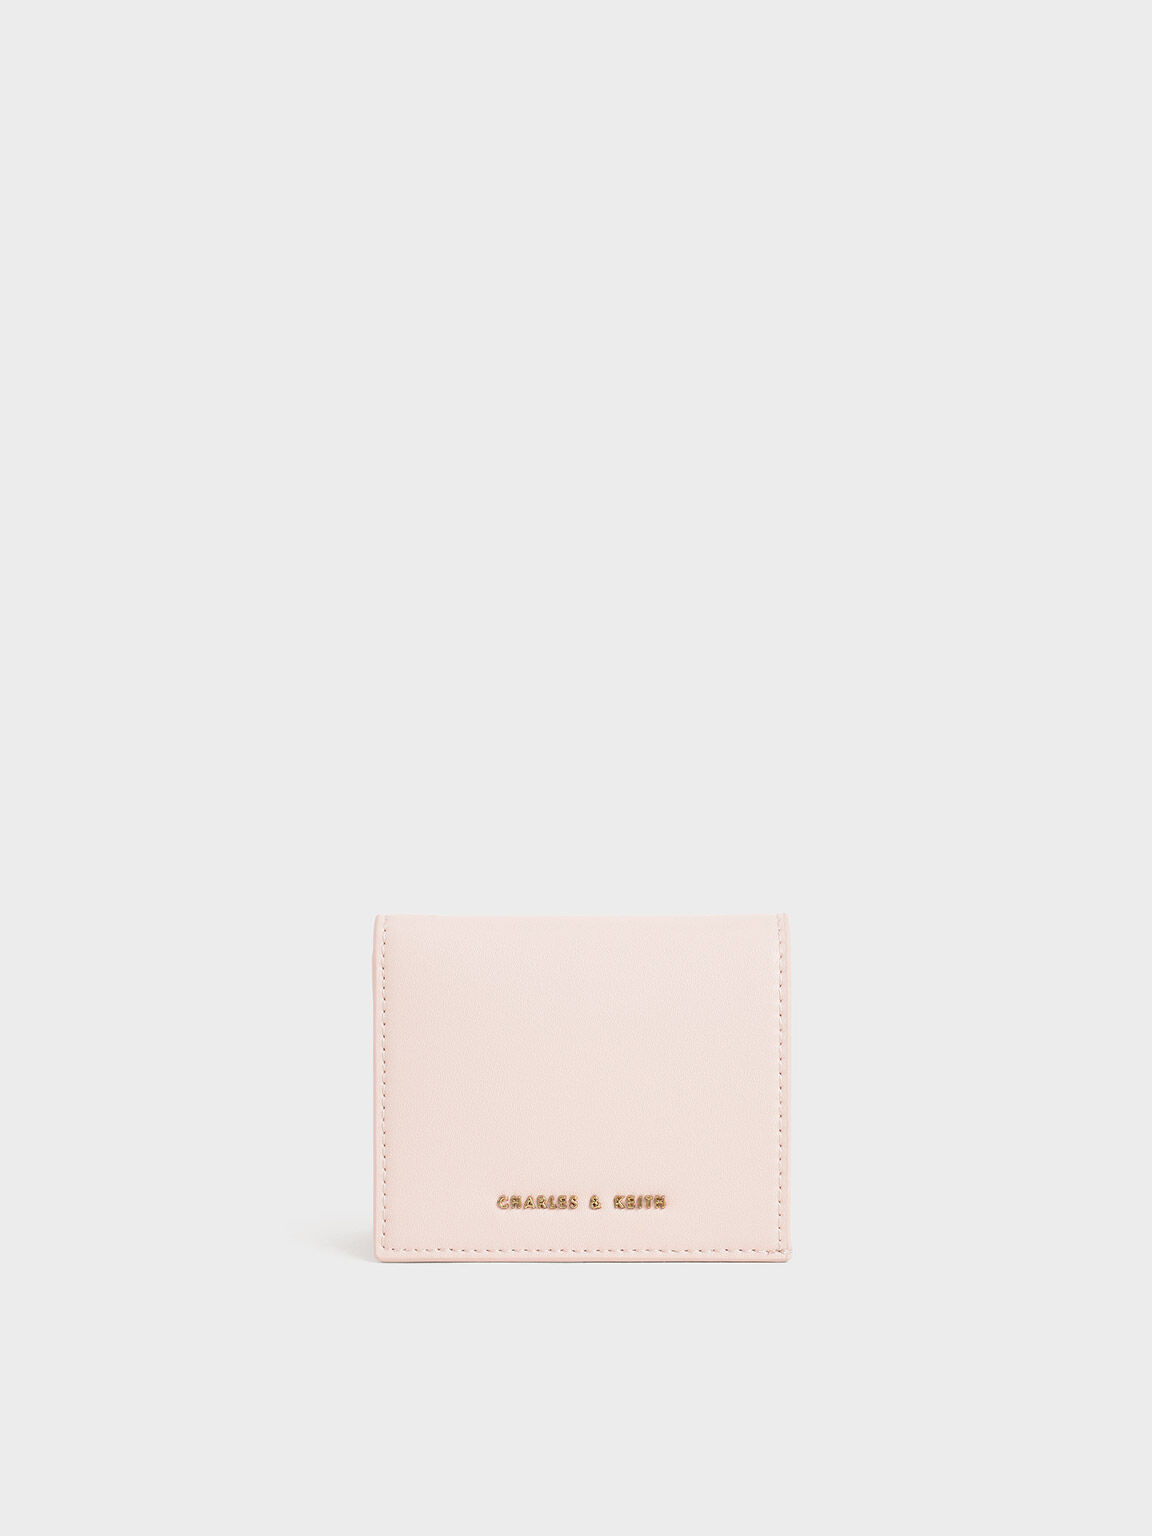 Personalised Leather Card Holder with Zip Pocket. Wallet, Credit Card Holder. Blush / No Personalisation